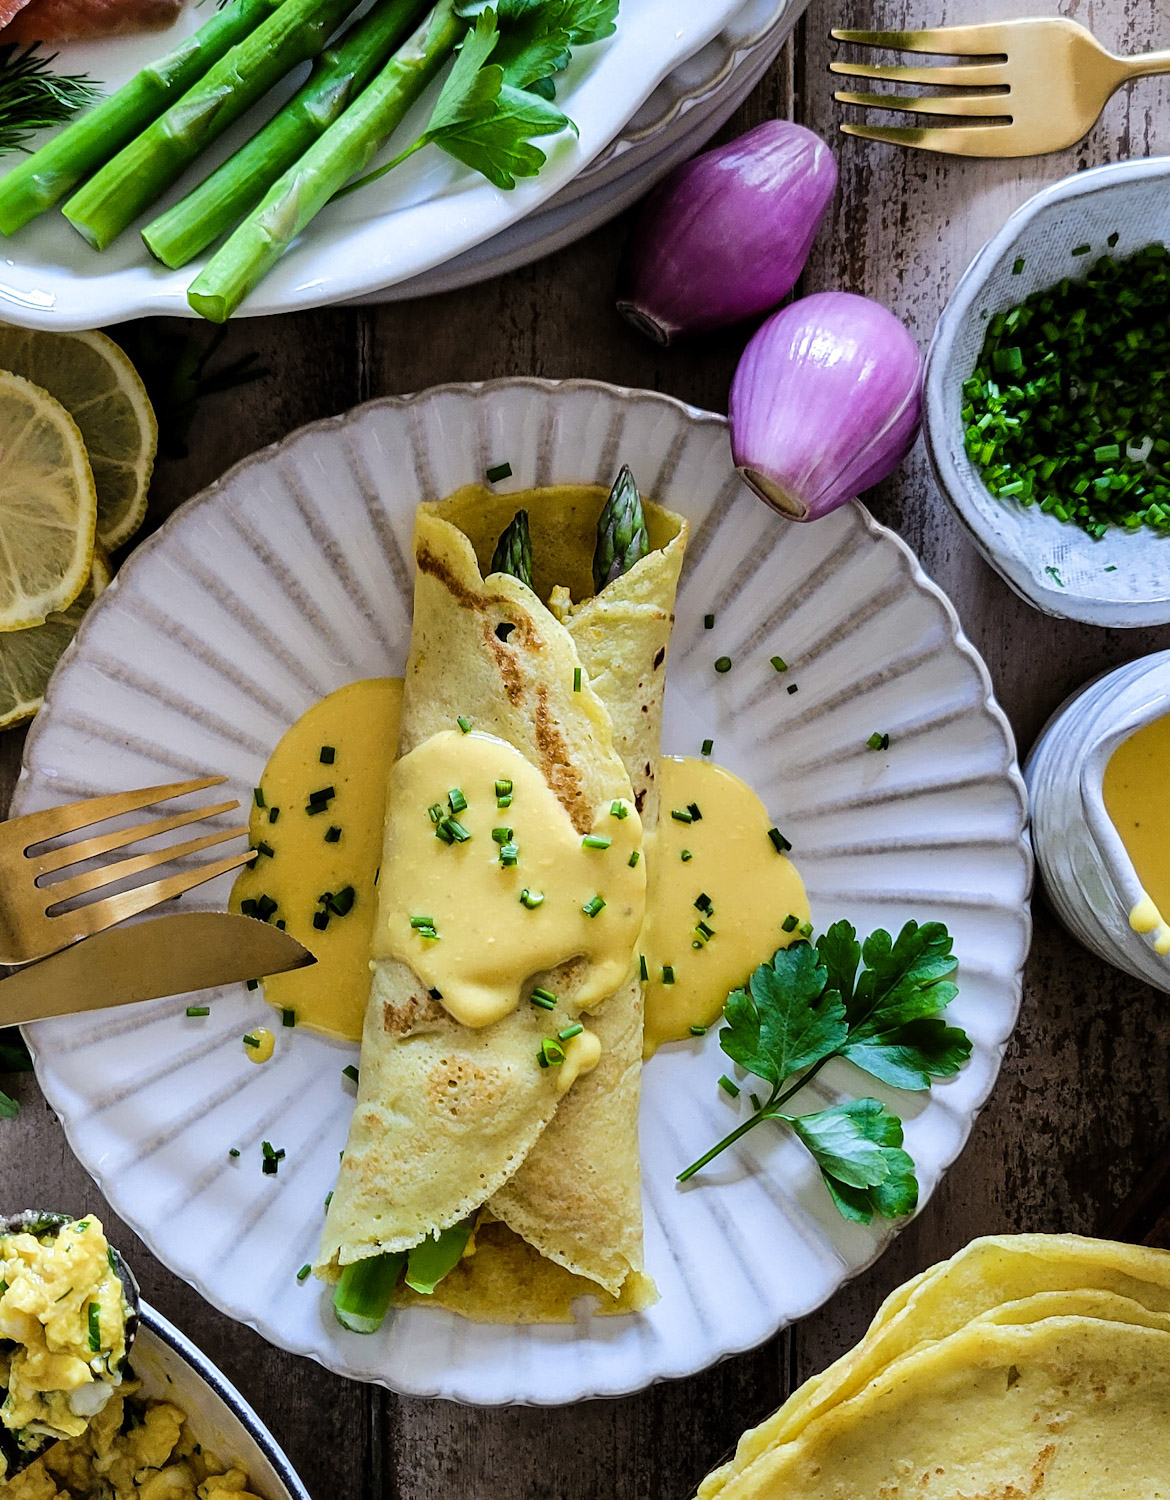 Plates of folded savory breakfast crepes, filled with asparagus, smoked salmon, creamy herbed scrambled eggs, hollandaise sauce, garnished with chives.